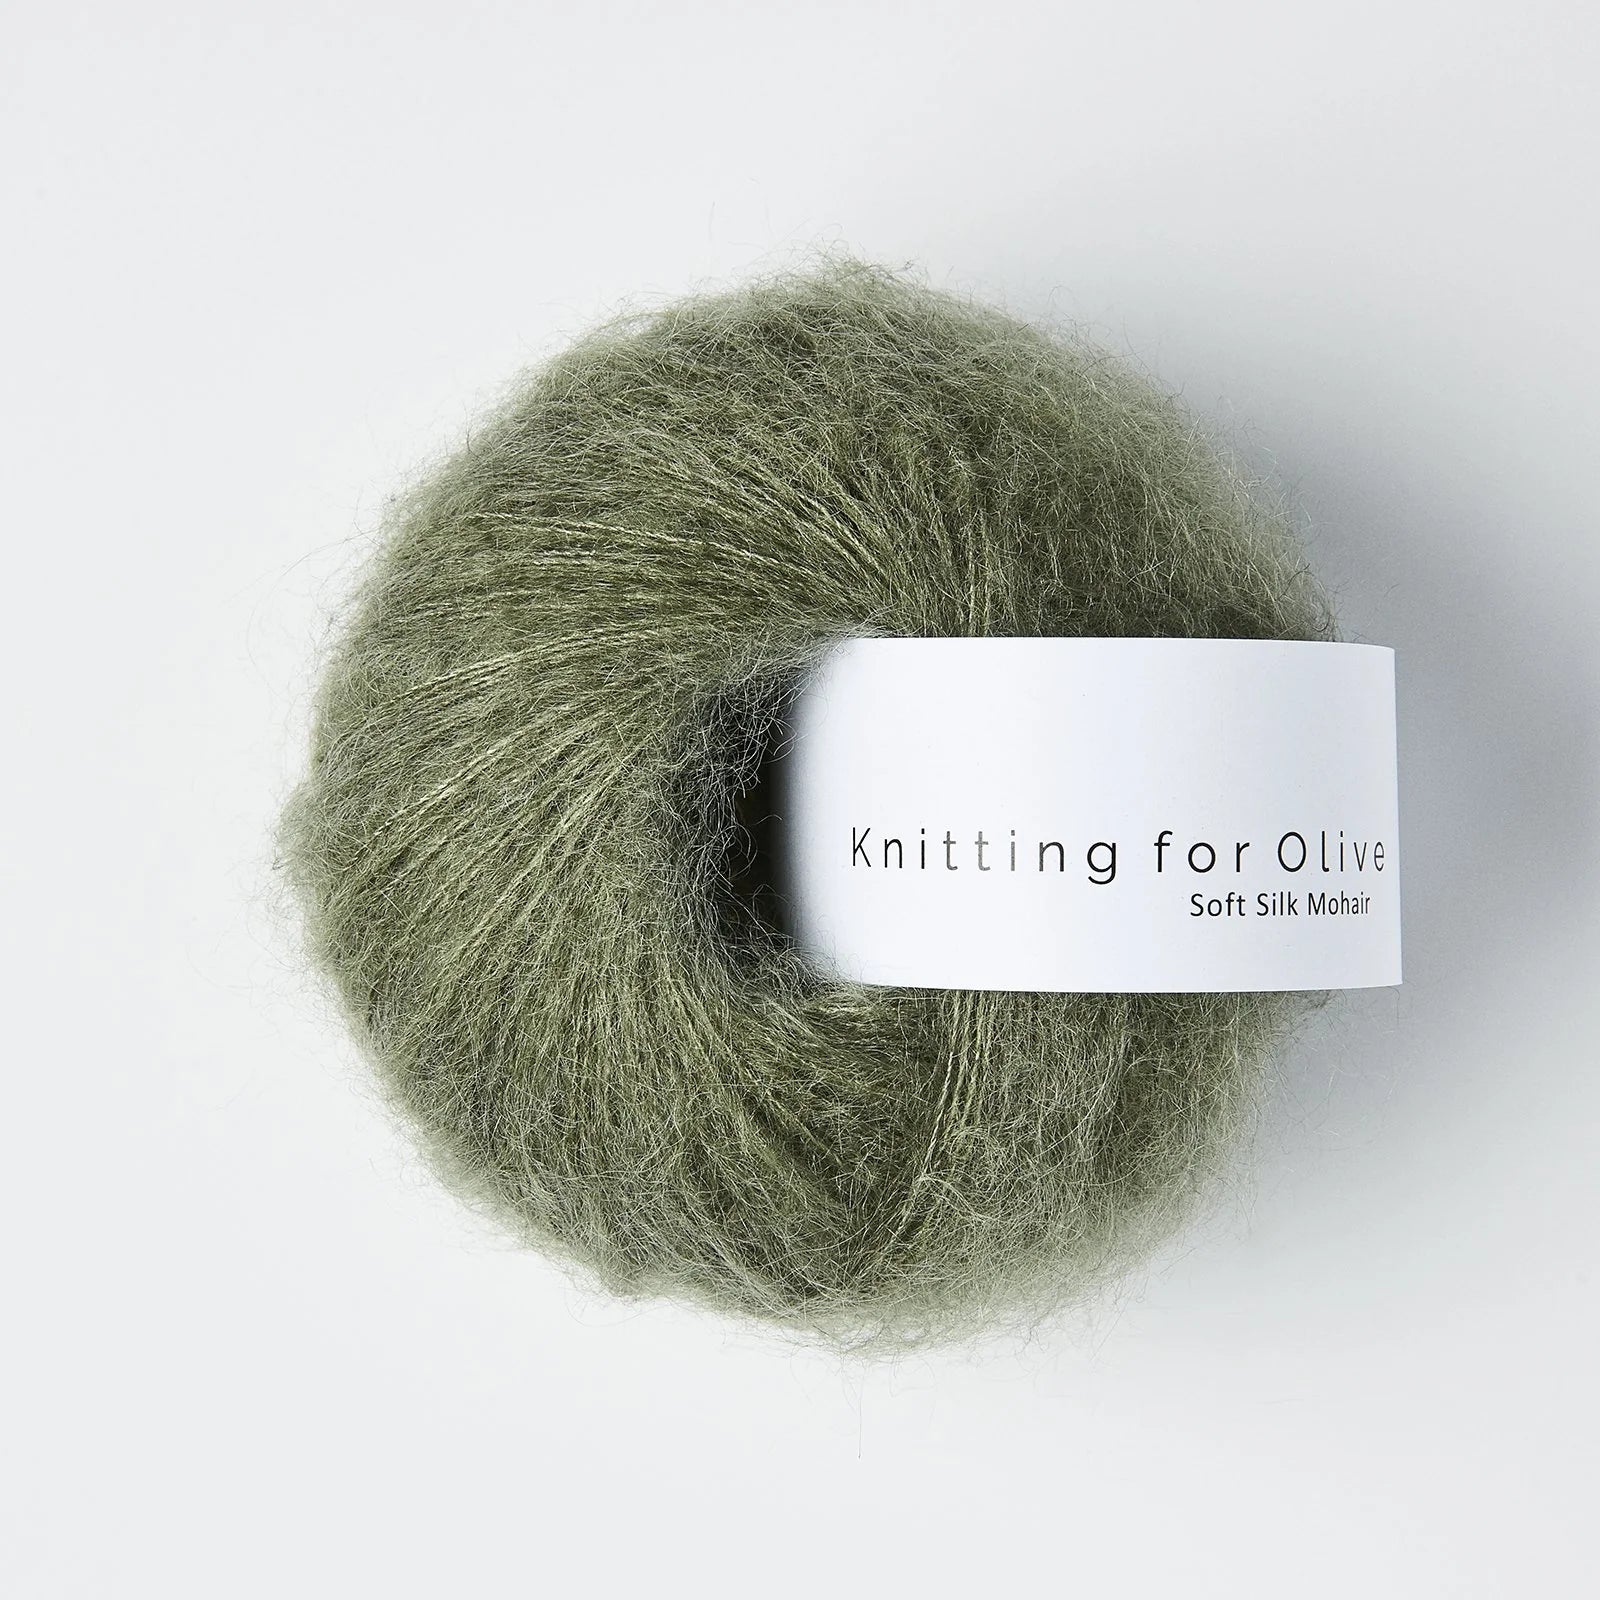 Knitting for Olive Soft Silk Mohair - Knitting for Olive - Dusty Sea Green - The Little Yarn Store